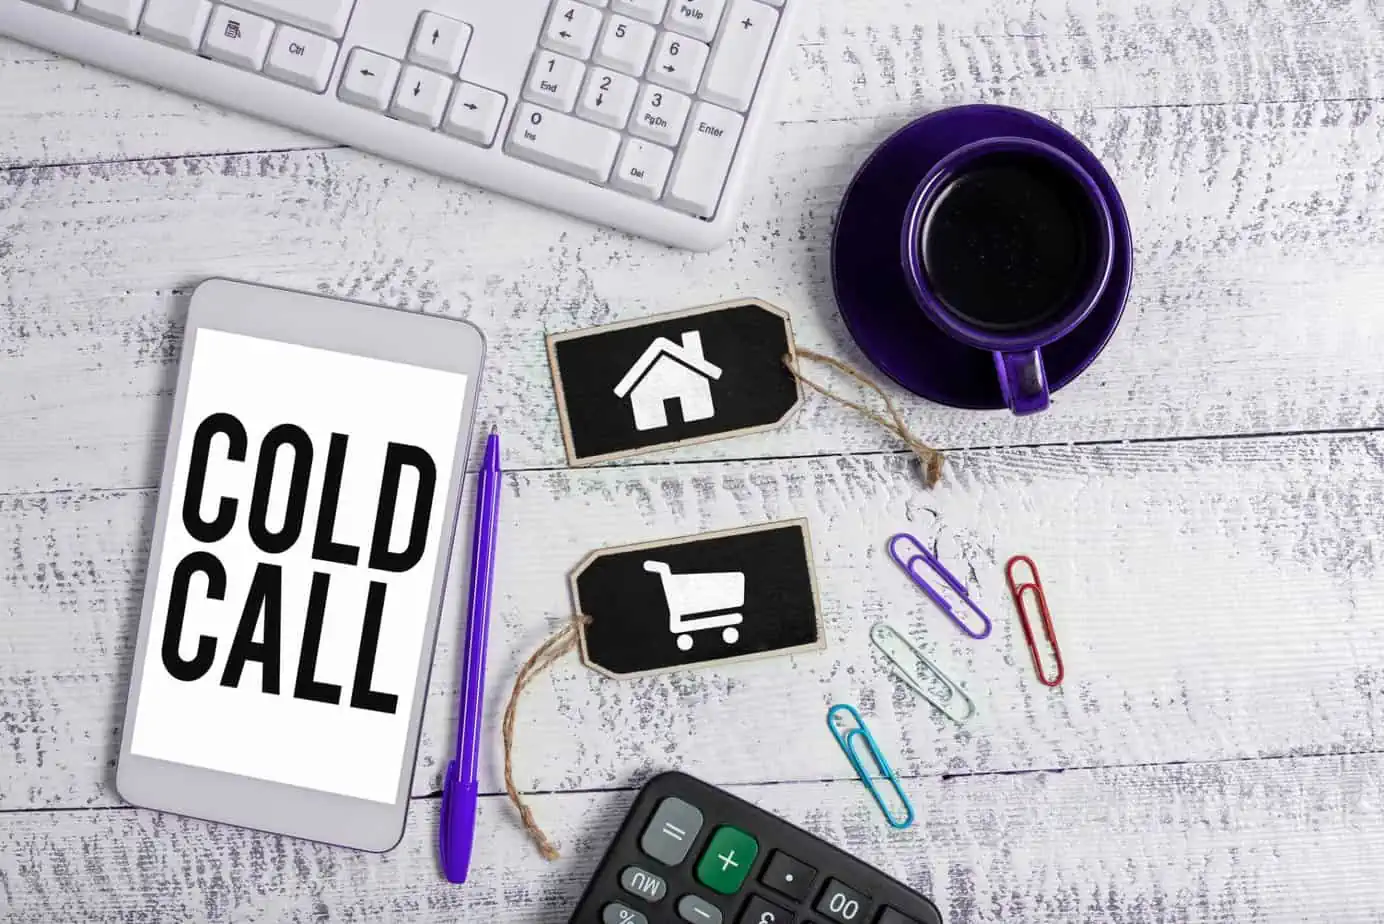 Cold Call for Merchant Services